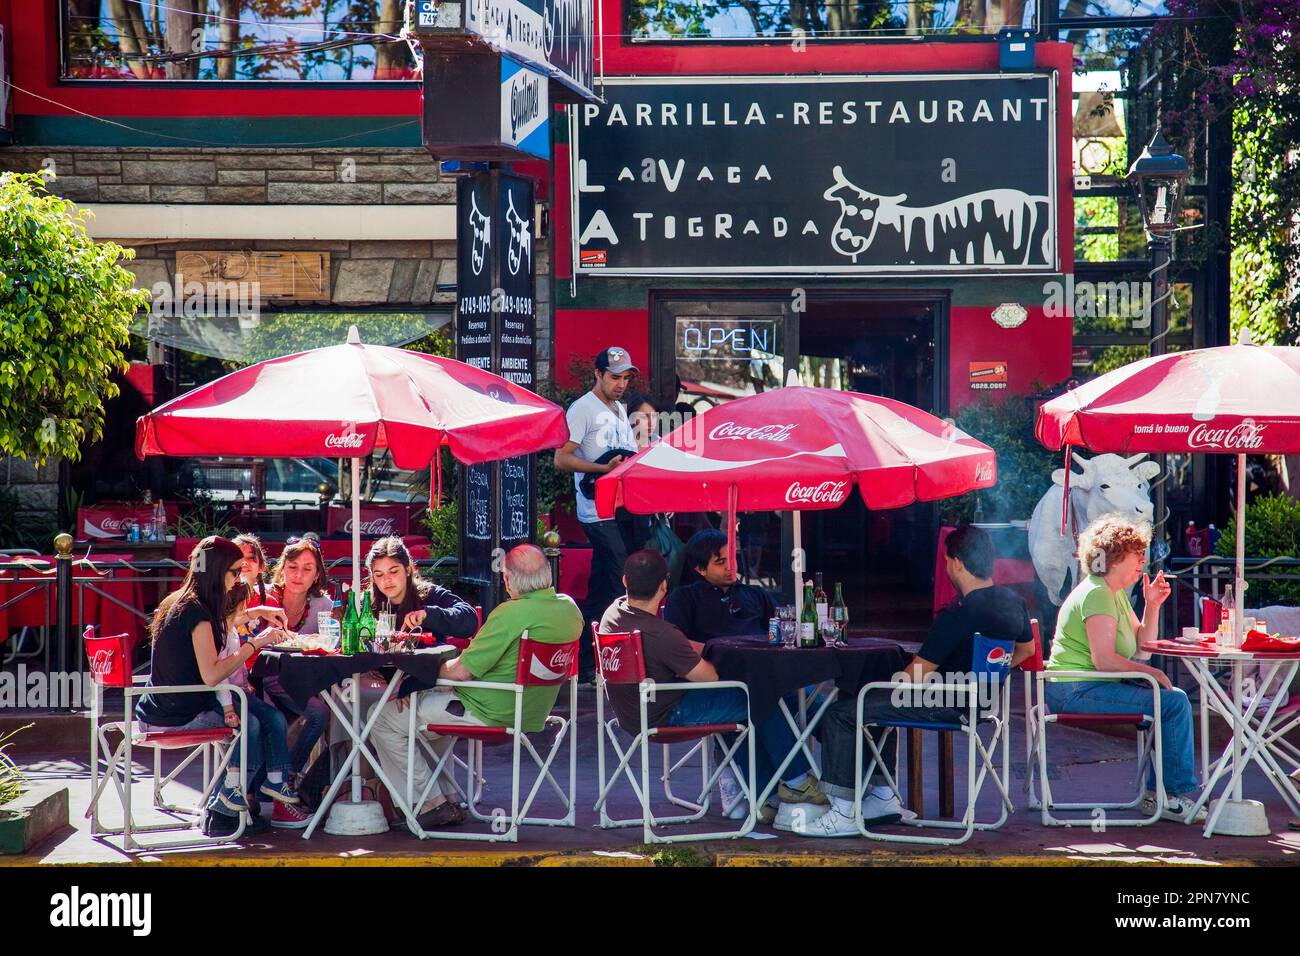 Argentina, Buenos Aires. There are many bars and restaurants around the Plaza Costa Rica in Palermo Soho. Stock Photo